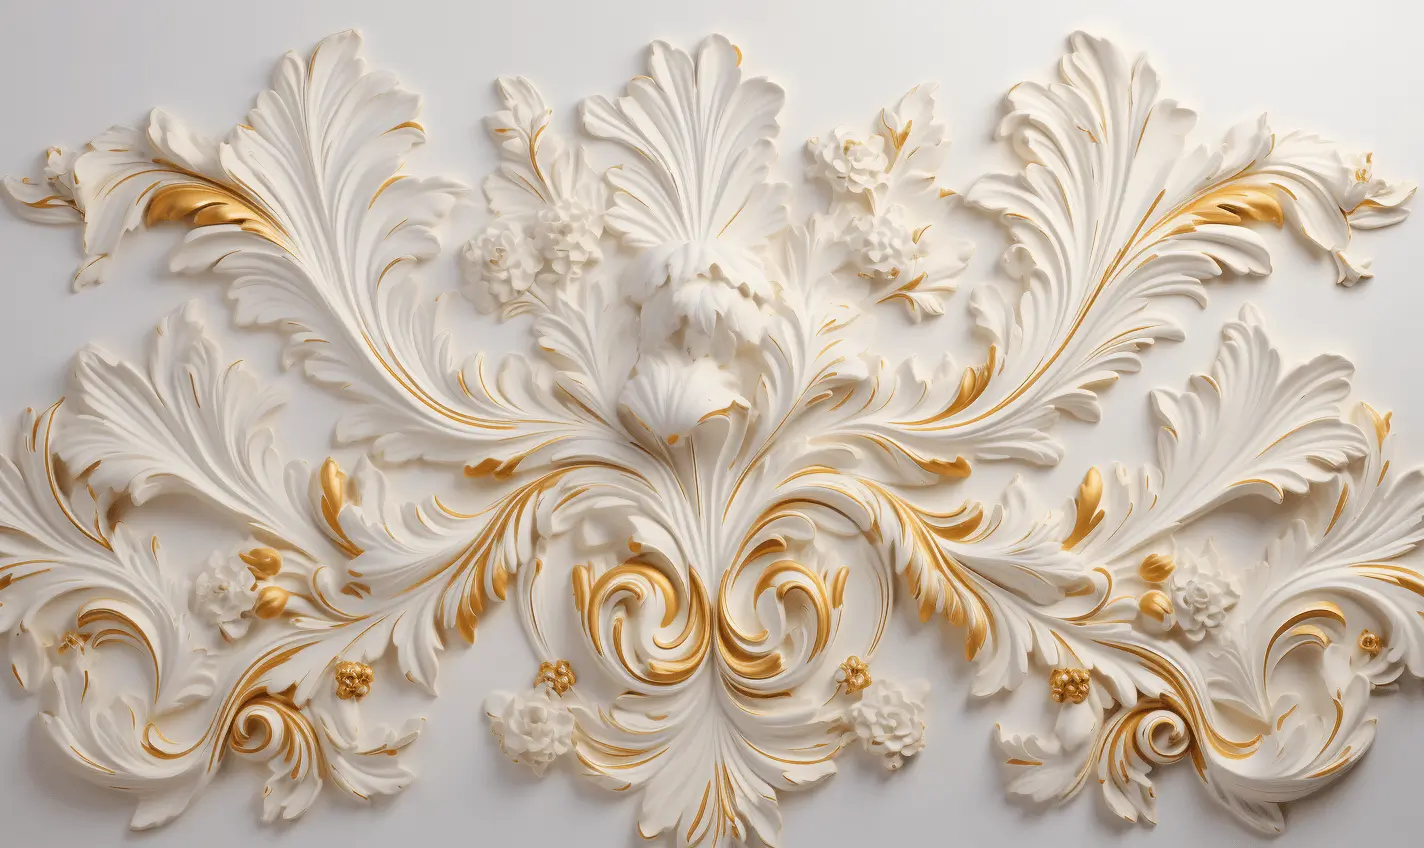 Damask wallpaper pattern_white shades and gold leaf